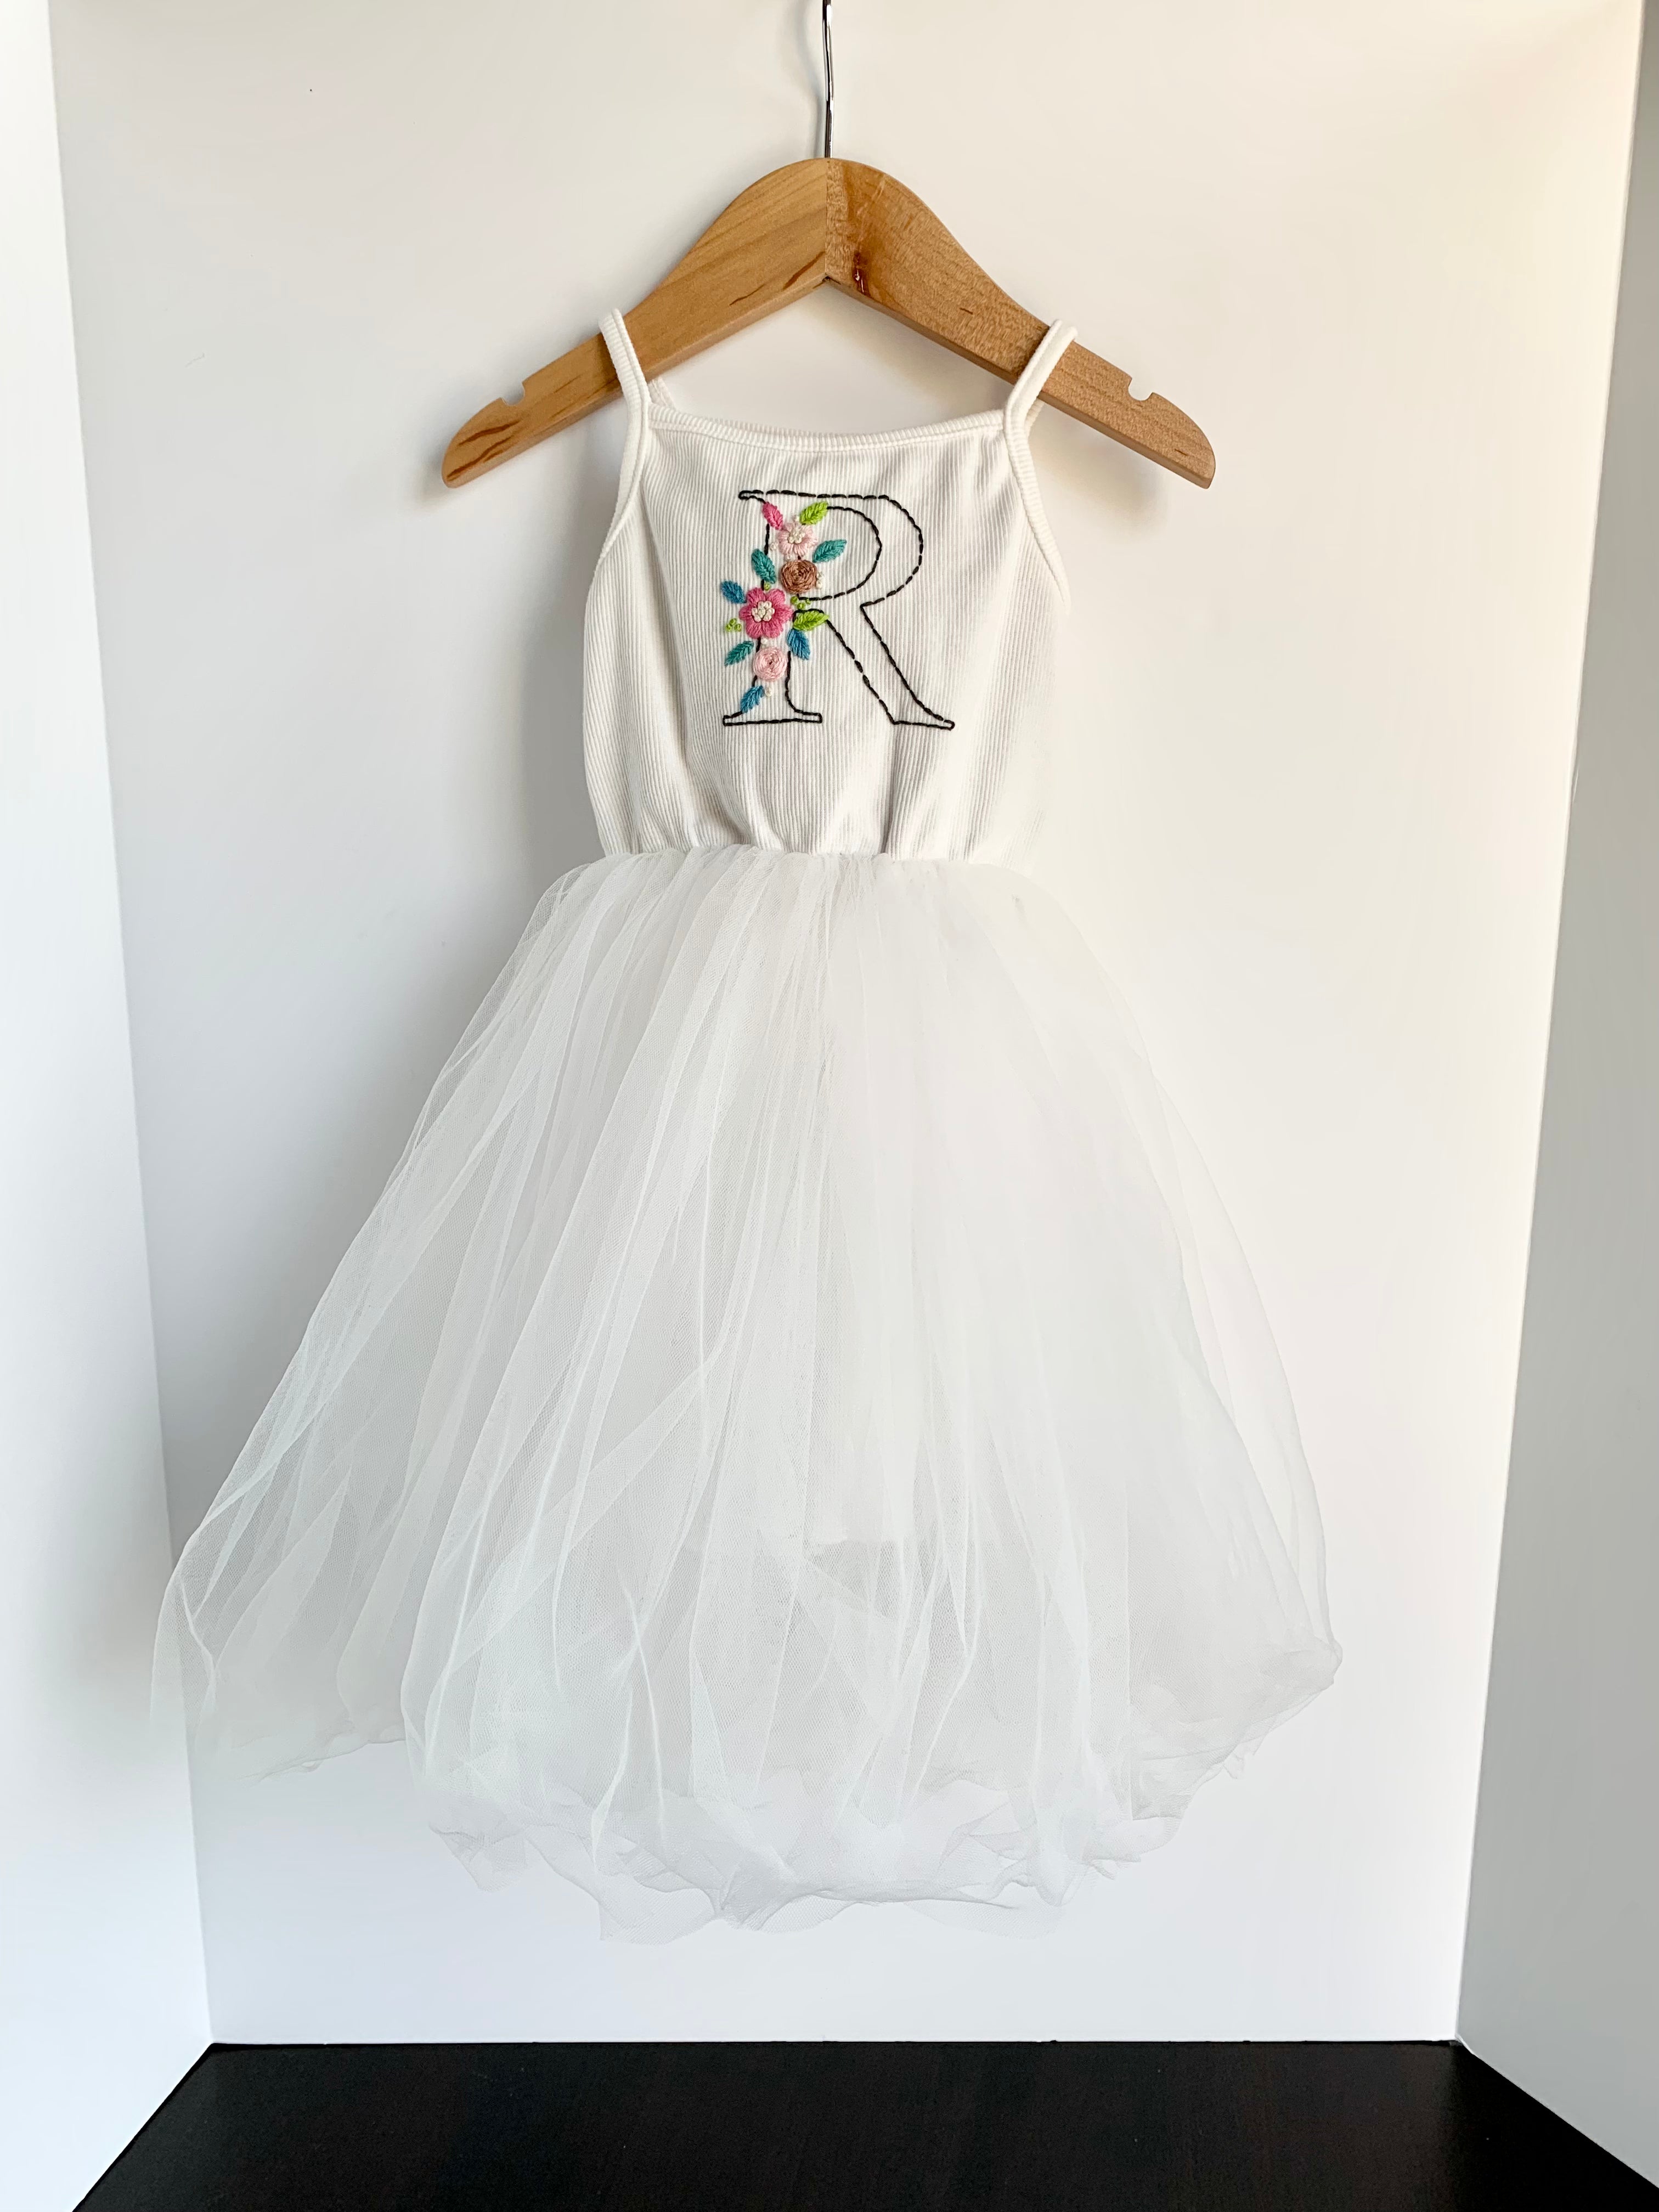 Floral Letter or Number Hand Embroidered Tutu and Cotton Dress